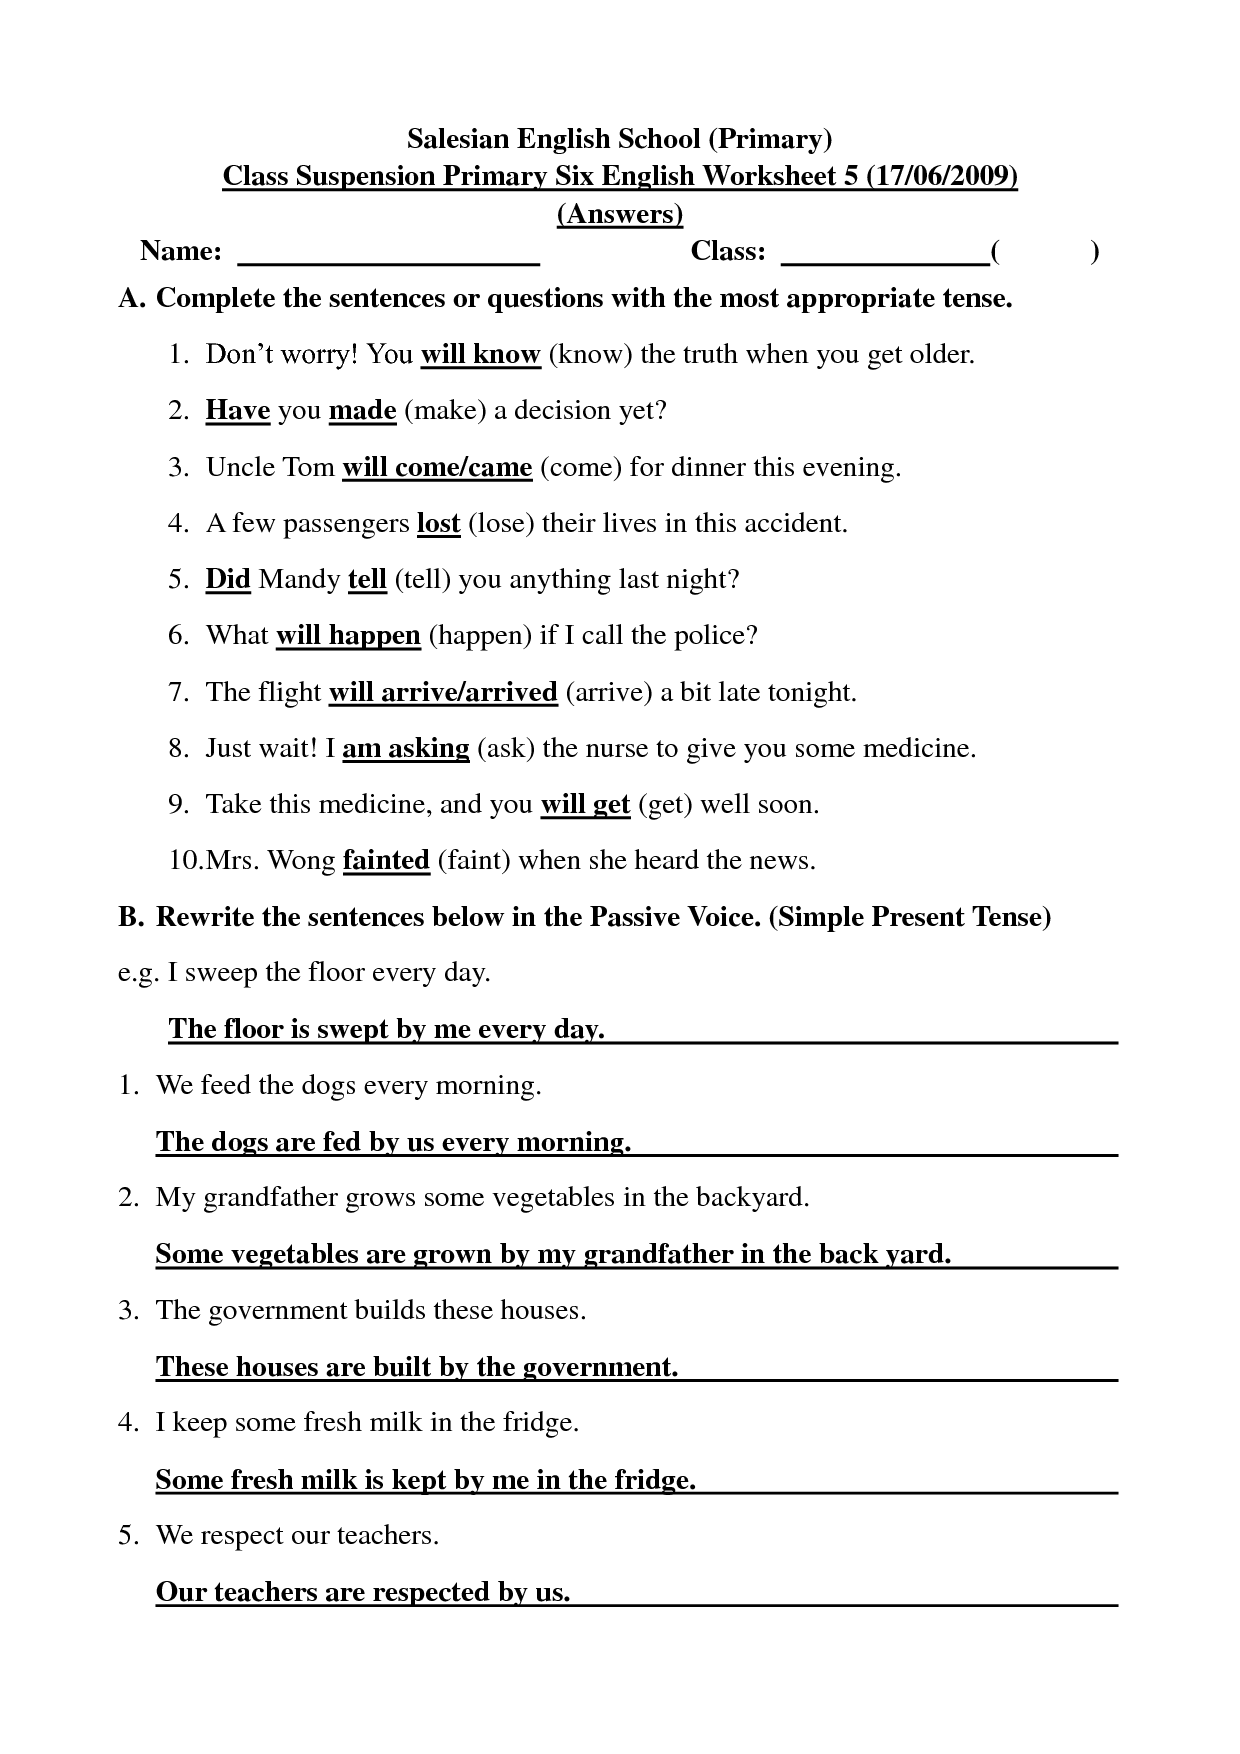 16-best-images-of-english-4-worksheets-free-english-grammar